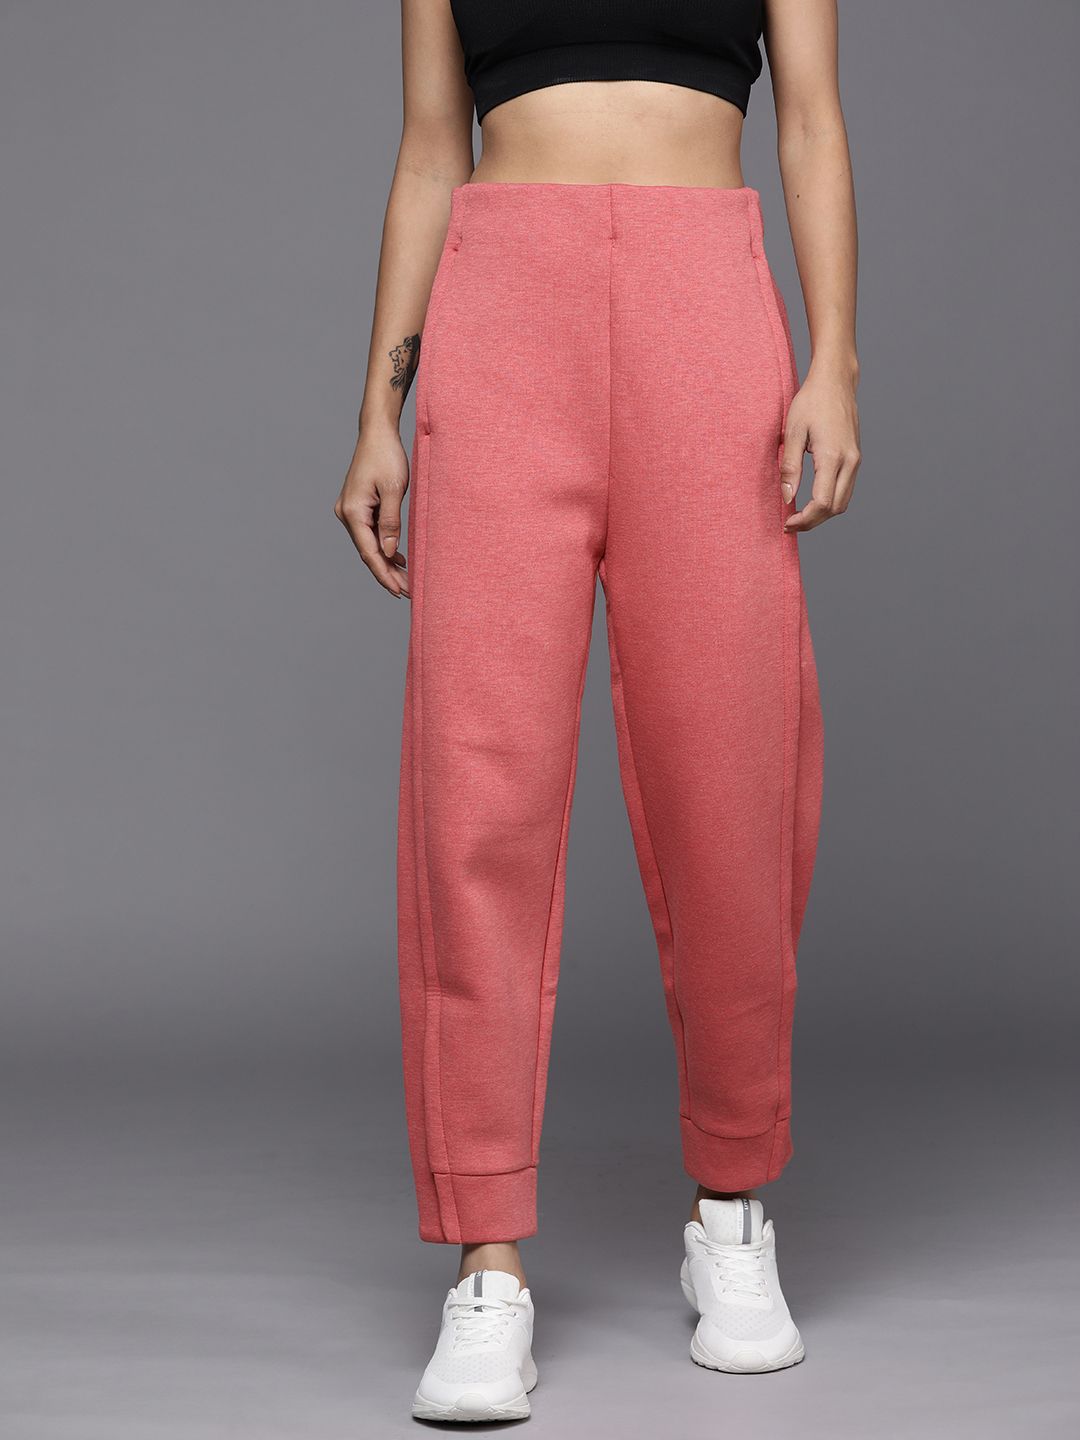 ADIDAS Women Pink Solid Joggers Price in India